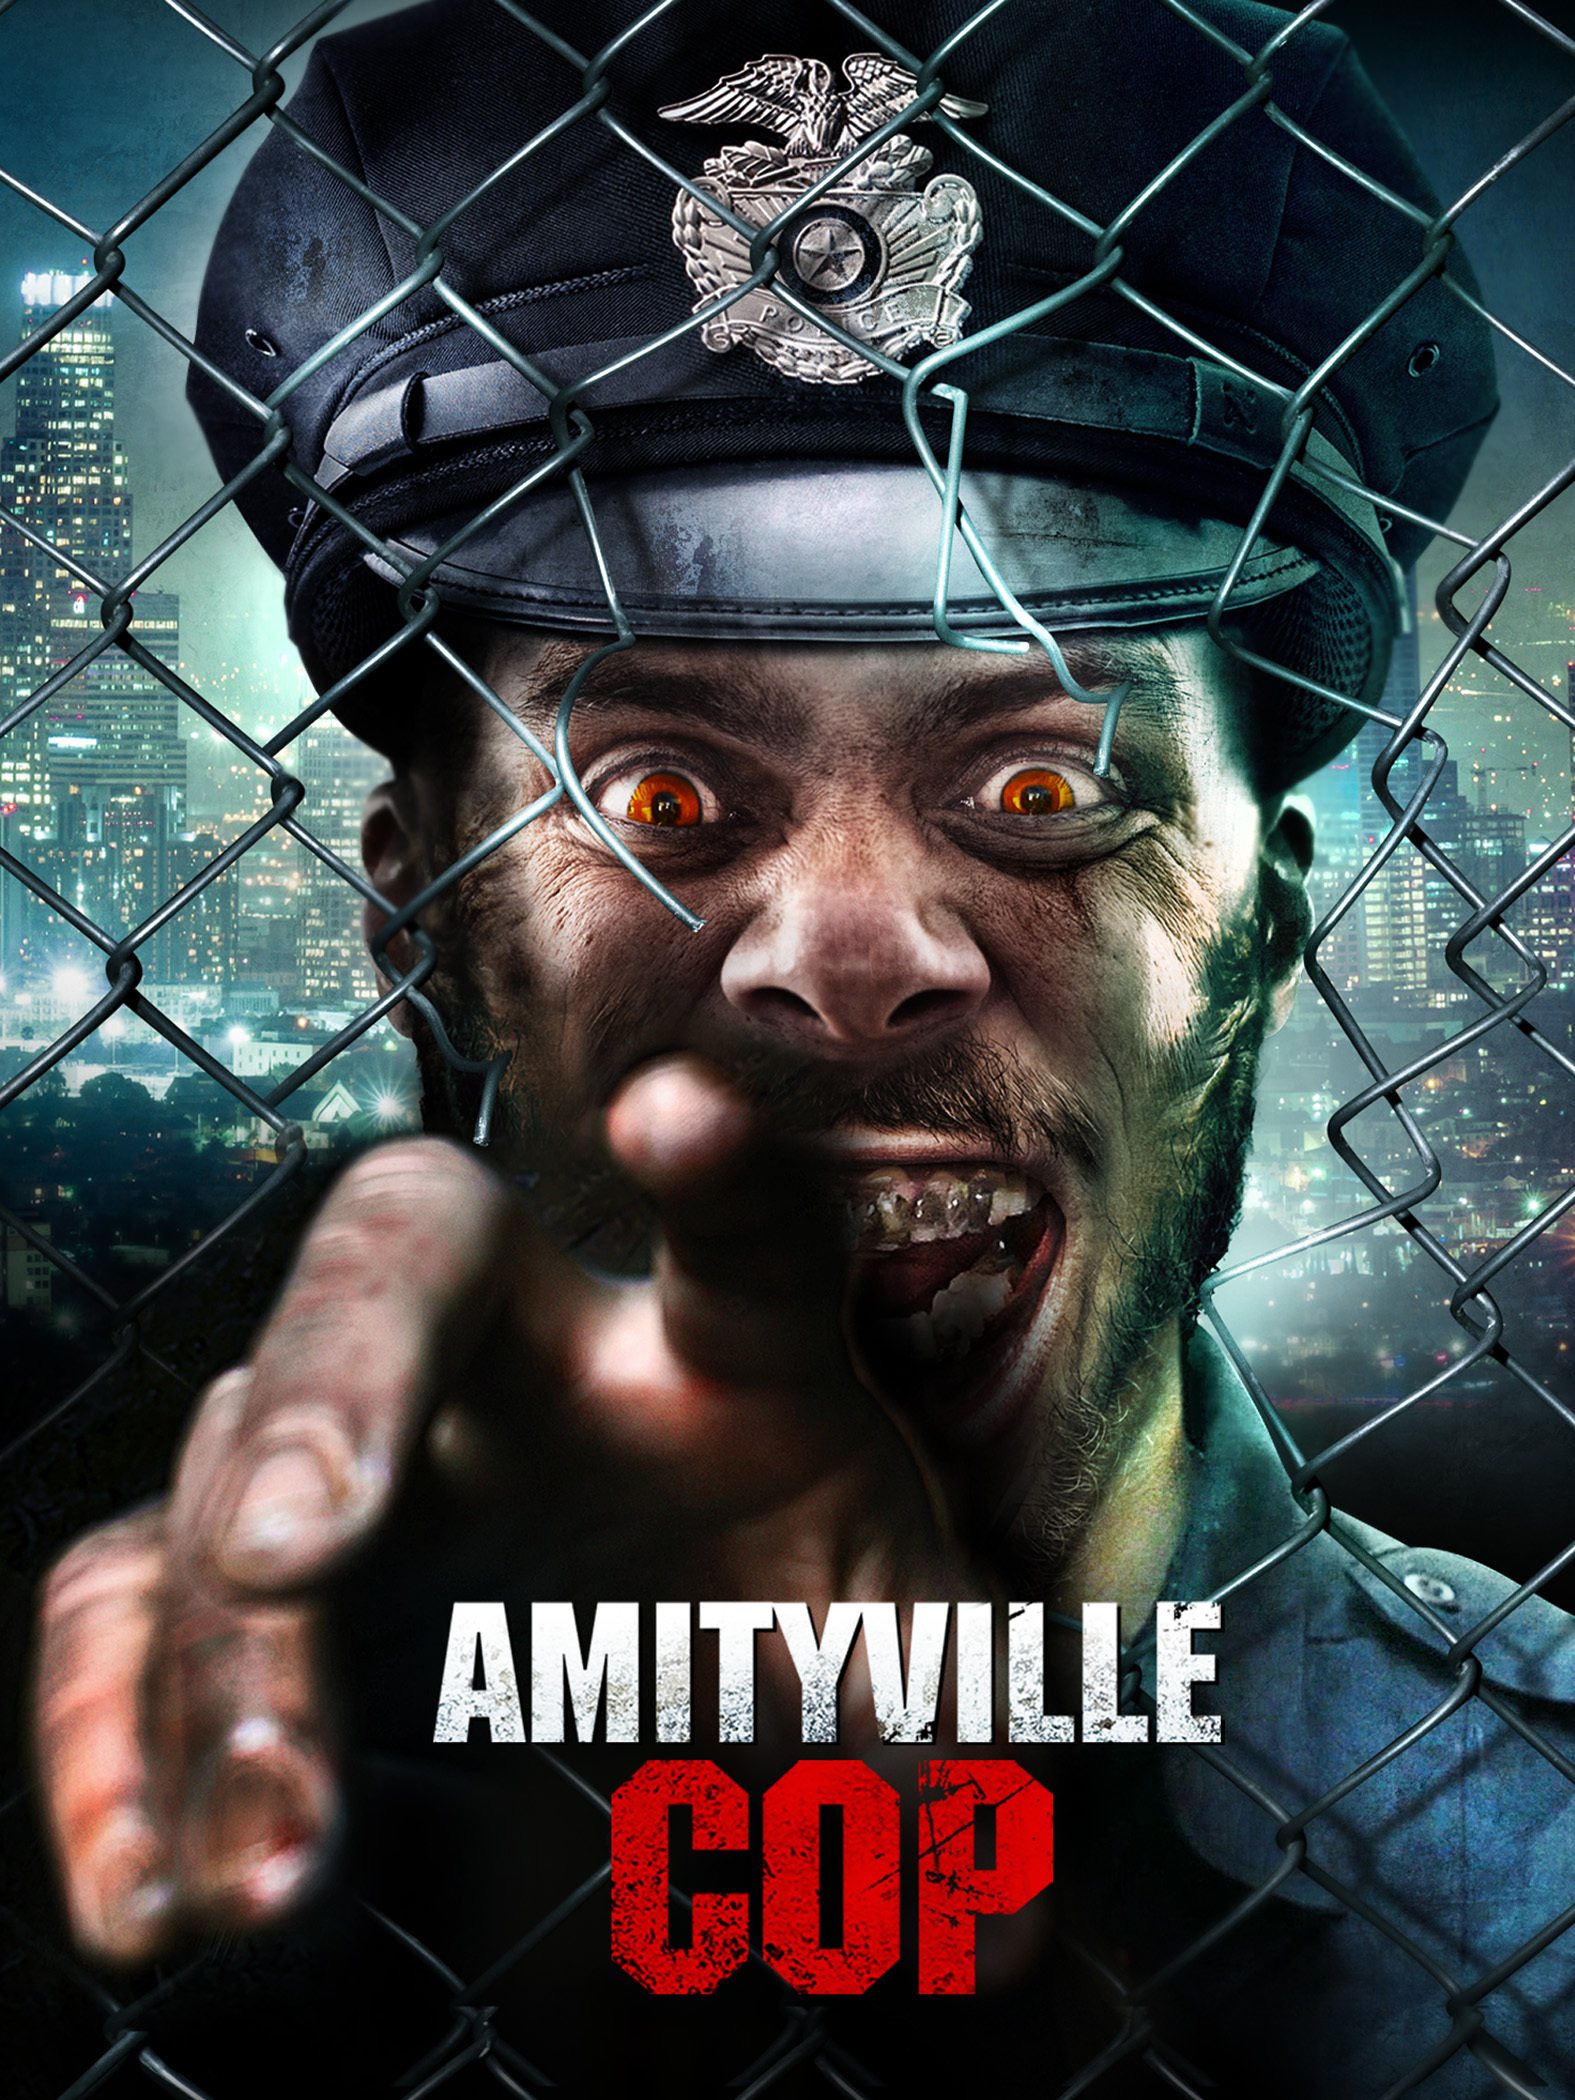 Gregory Hatanakas AMITYVILLE COP Now Available on VOD